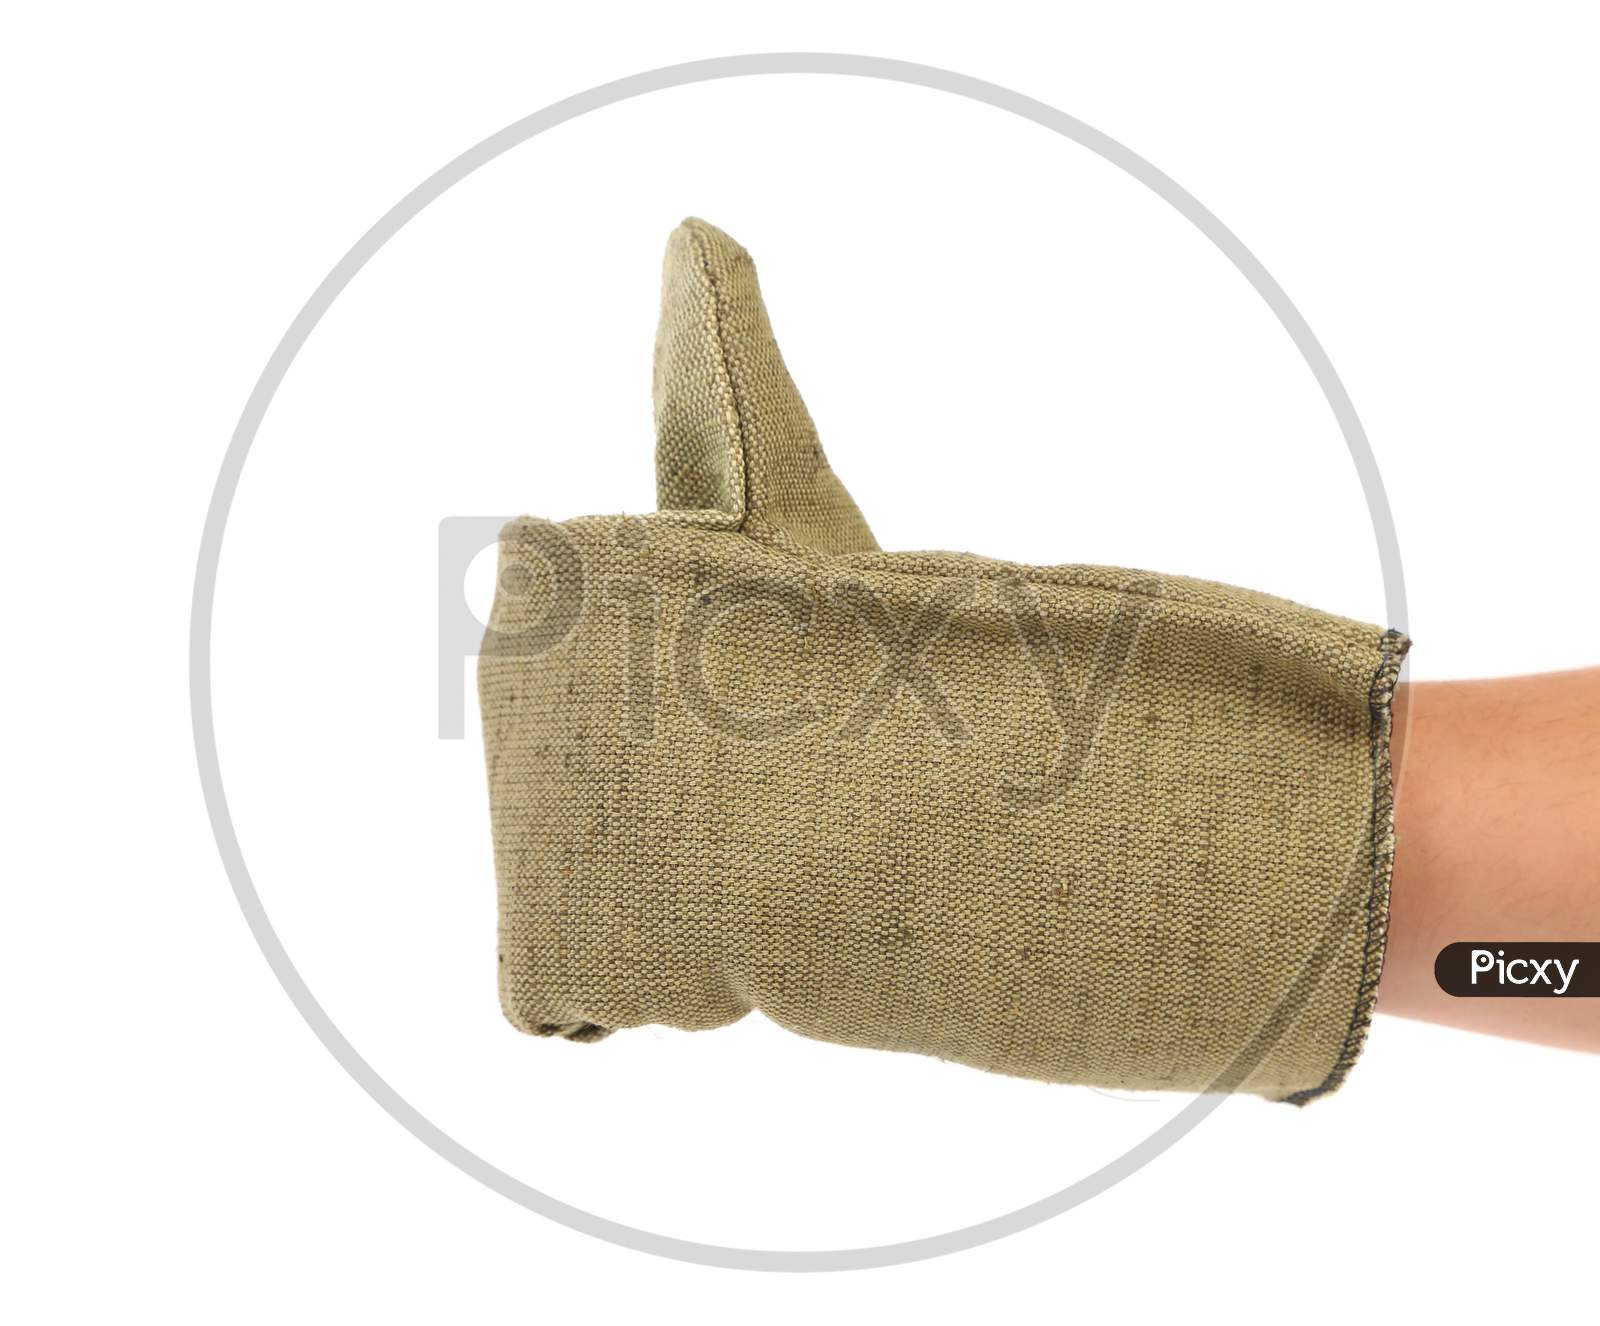 Gray Mittens On Hand. Isolated On A White Background.